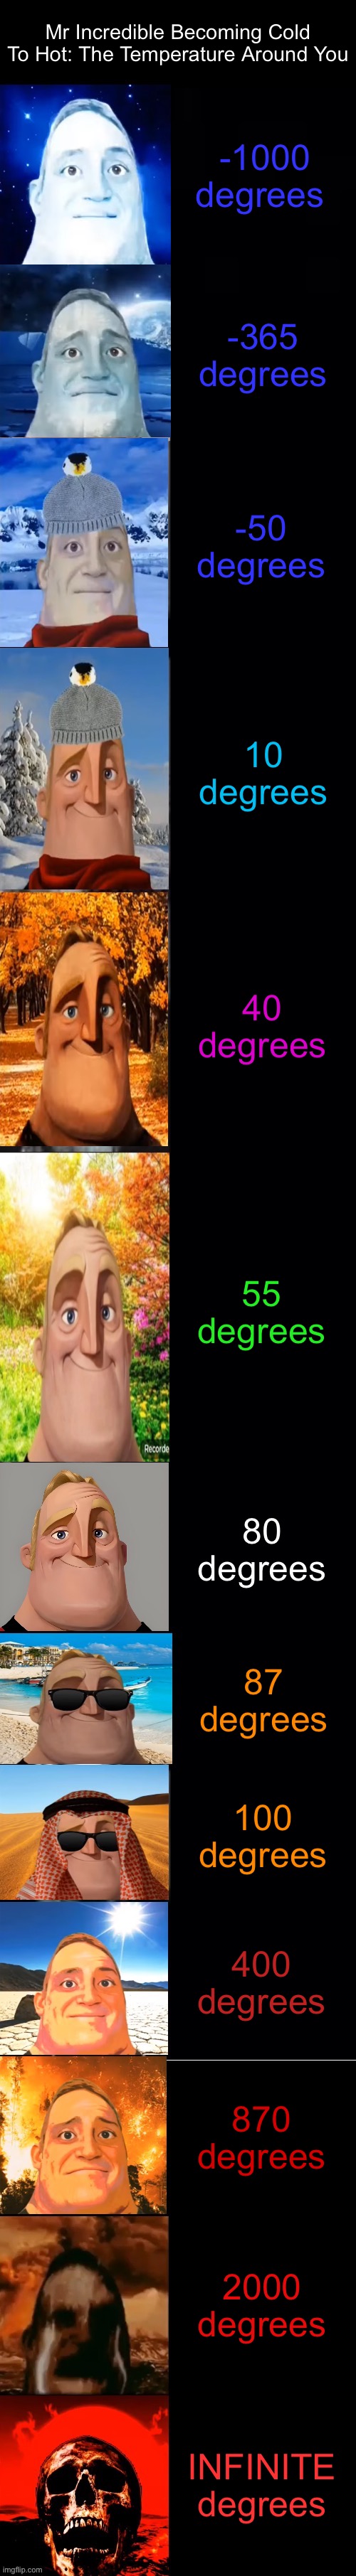 Mr Incredible Becoming Cold To Hot: The Temperature Around You | Mr Incredible Becoming Cold To Hot: The Temperature Around You; -1000 degrees; -365 degrees; -50 degrees; 10 degrees; 40 degrees; 55 degrees; 80 degrees; 87 degrees; 100 degrees; 400 degrees; 870 degrees; 2000 degrees; INFINITE degrees | image tagged in mr incredible becoming cold to hot | made w/ Imgflip meme maker